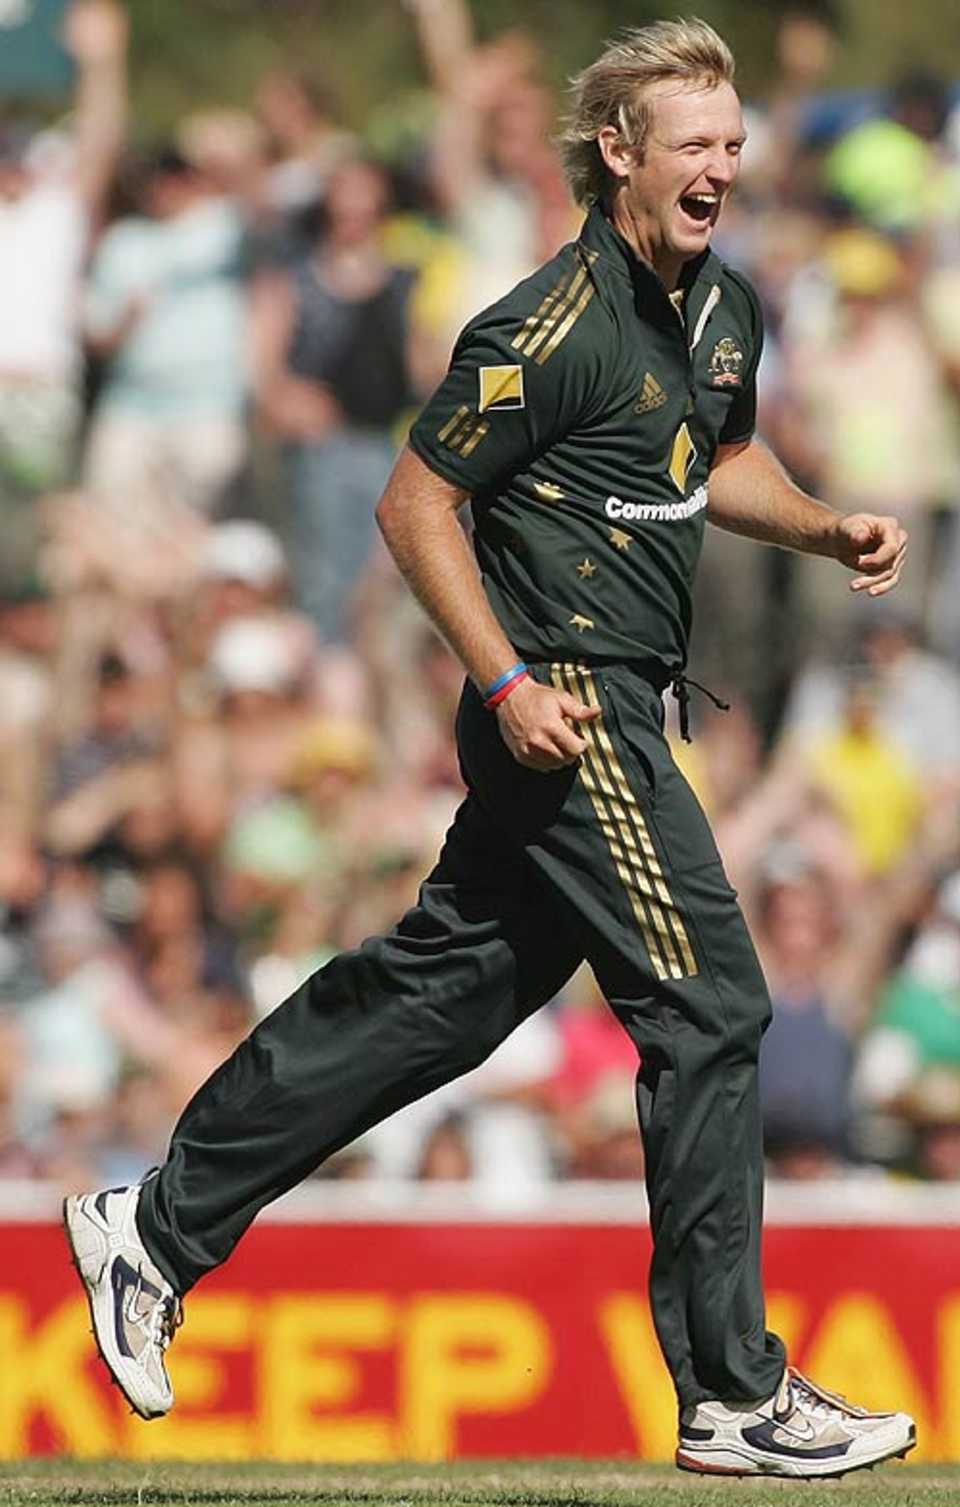 Cameron White celebrates the wicket of James Franklin, his second in seven ODIs, Australia v New Zealand, CB Series, 2nd match, Hobart, January 14, 2007